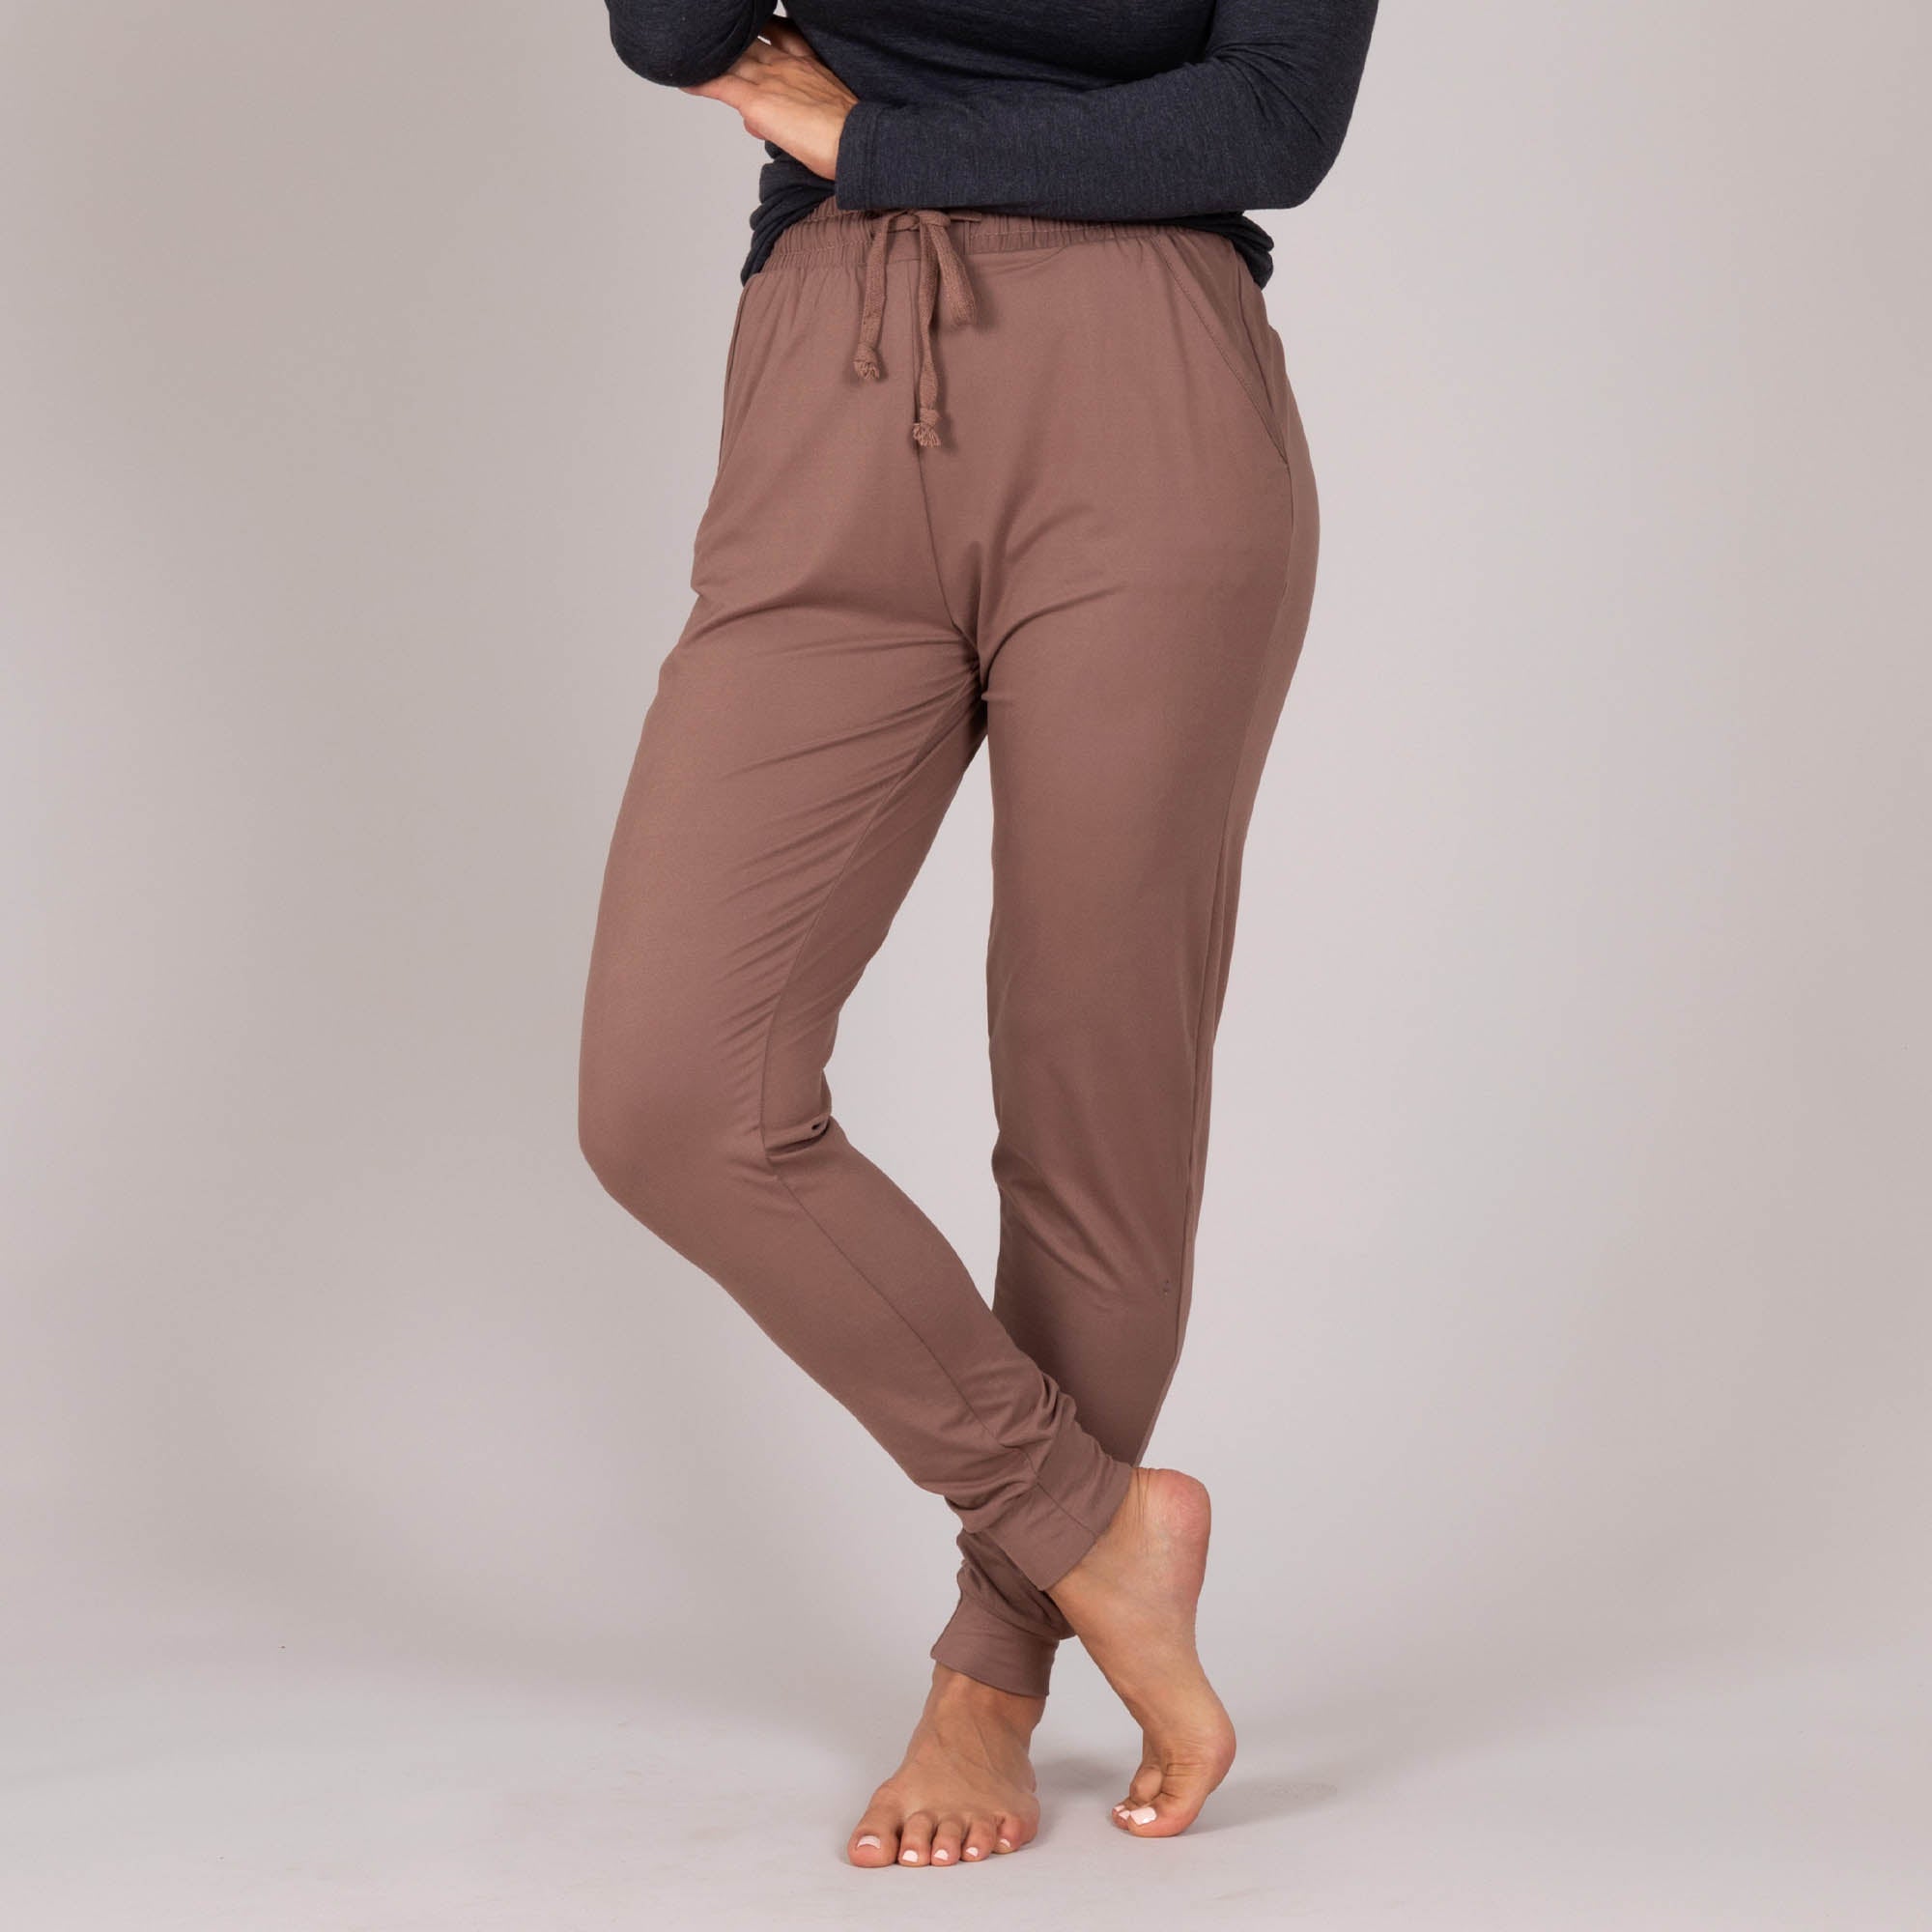 Solid Brushed Jogger Pants - Brown - 2X